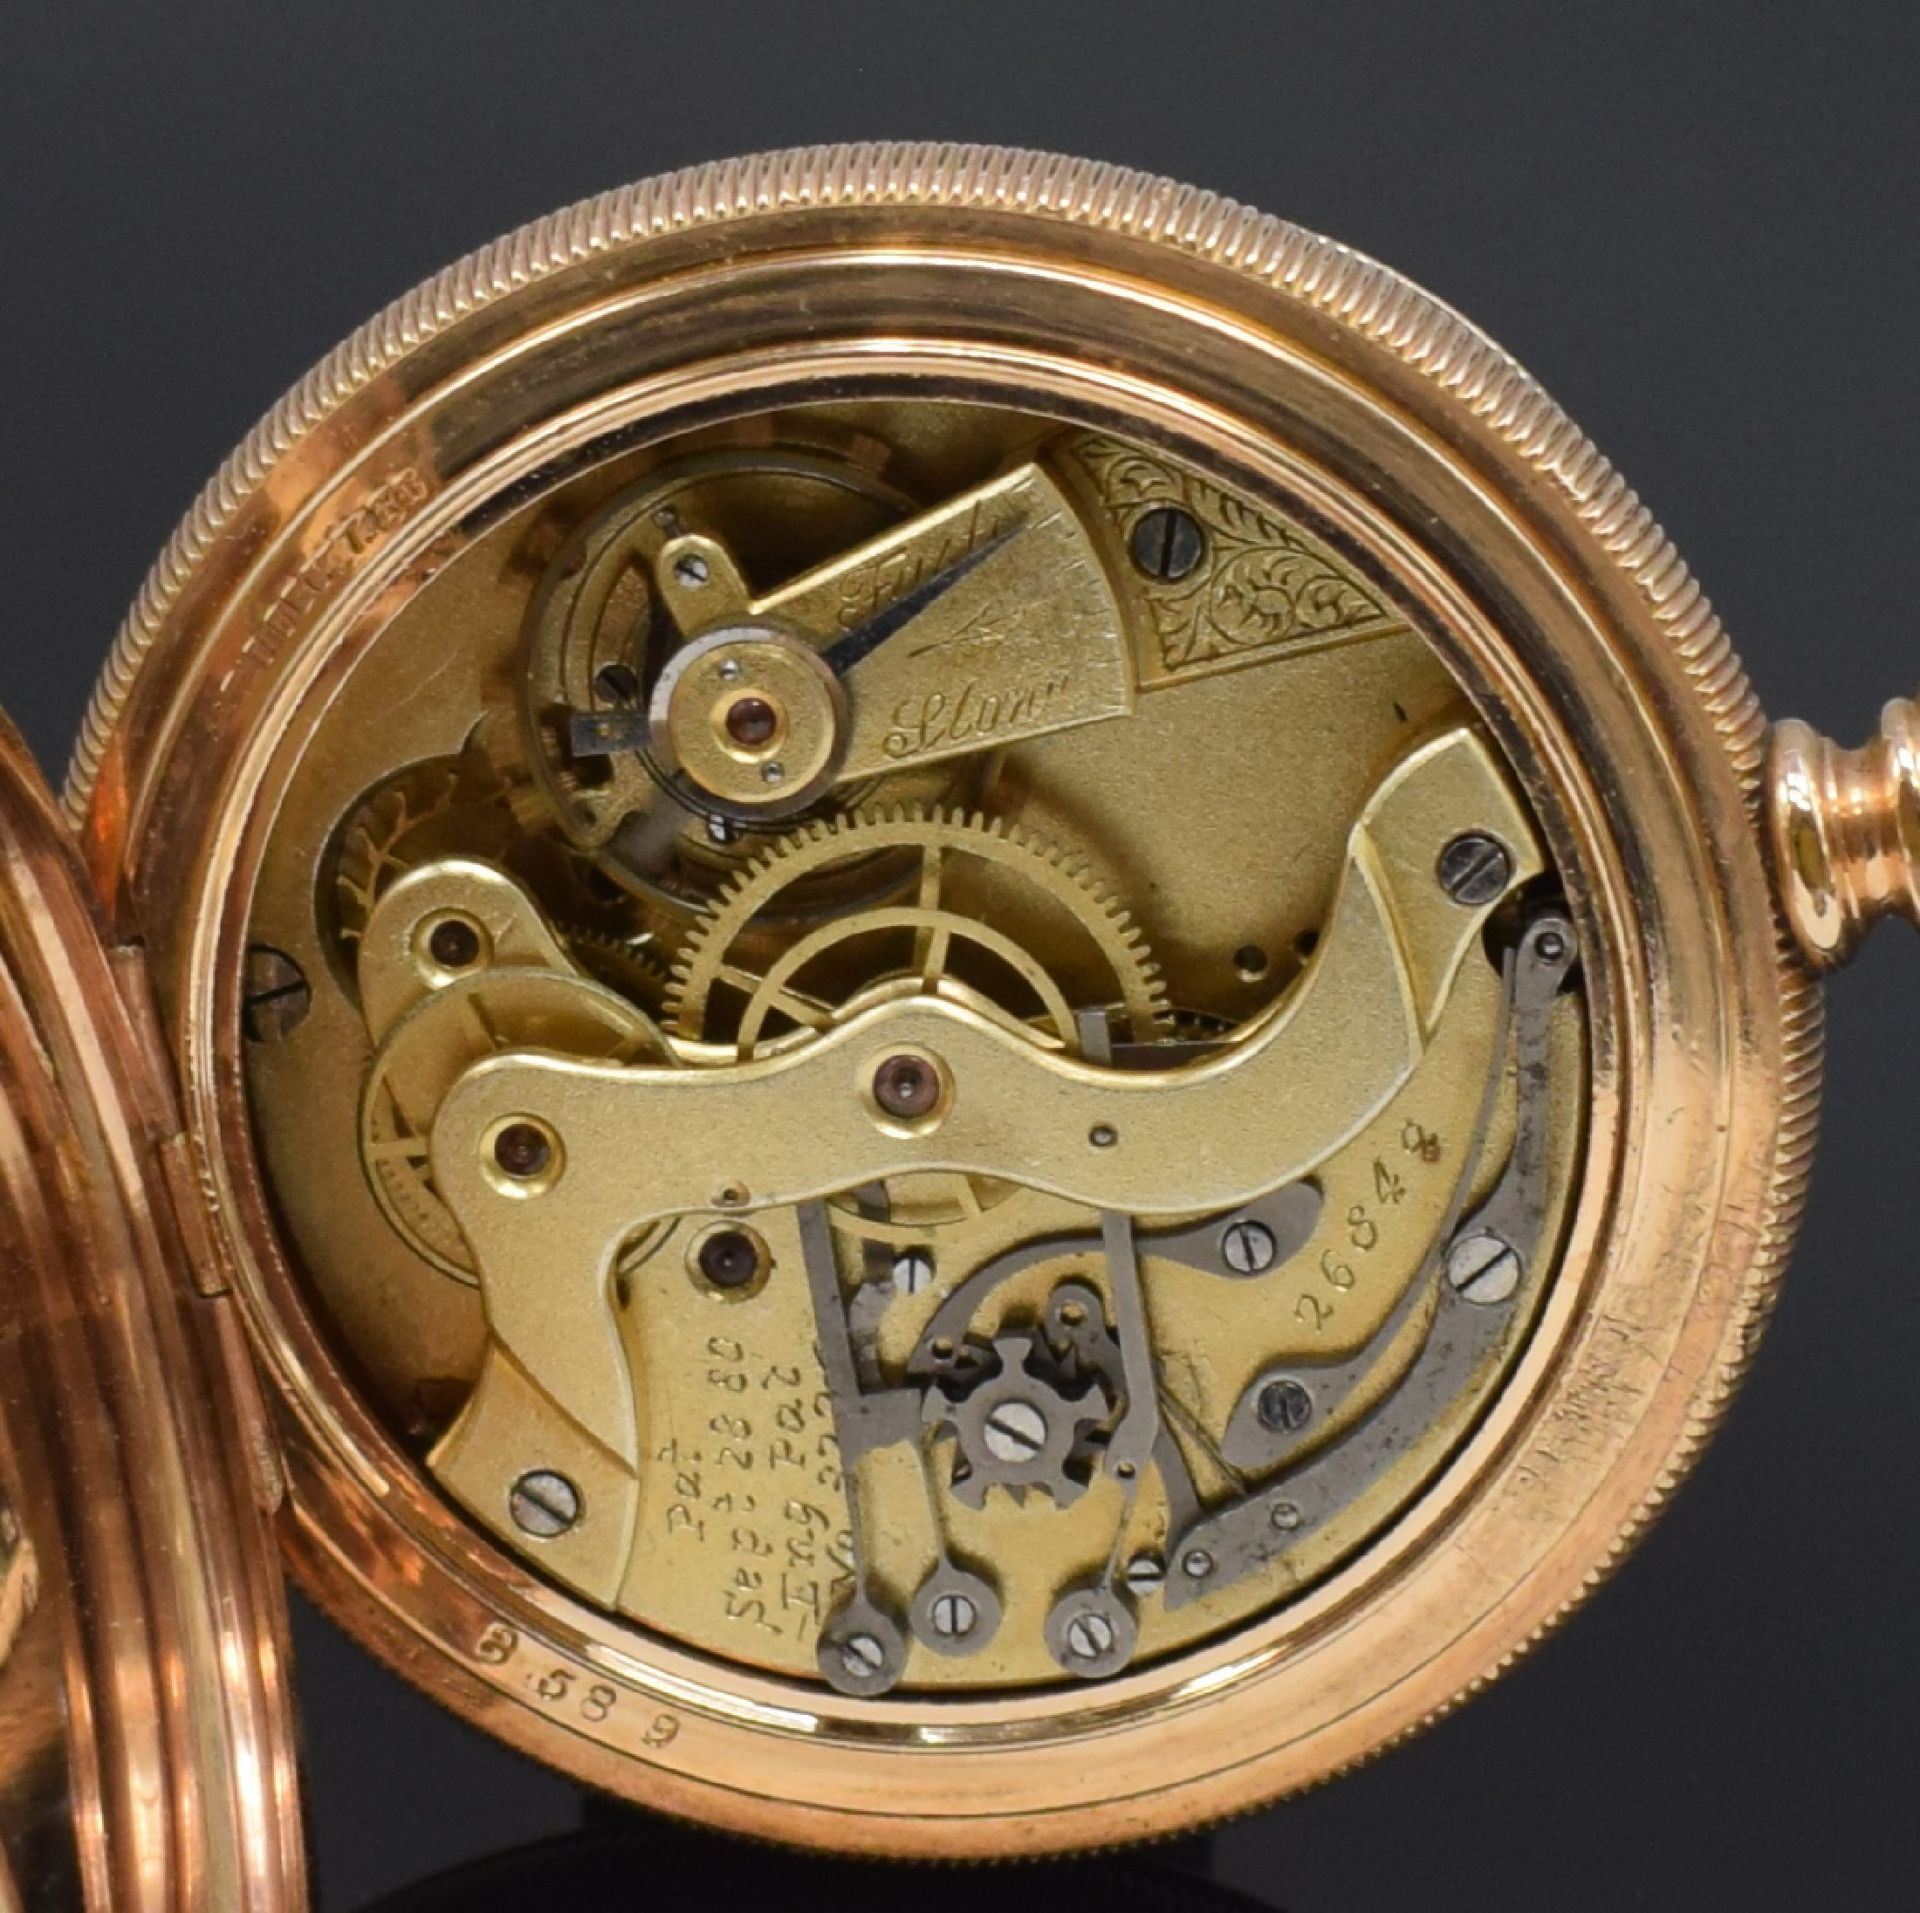 WALTHAM WATCH Co und TIMING REPEATING WATCH Cooffene - Image 3 of 6